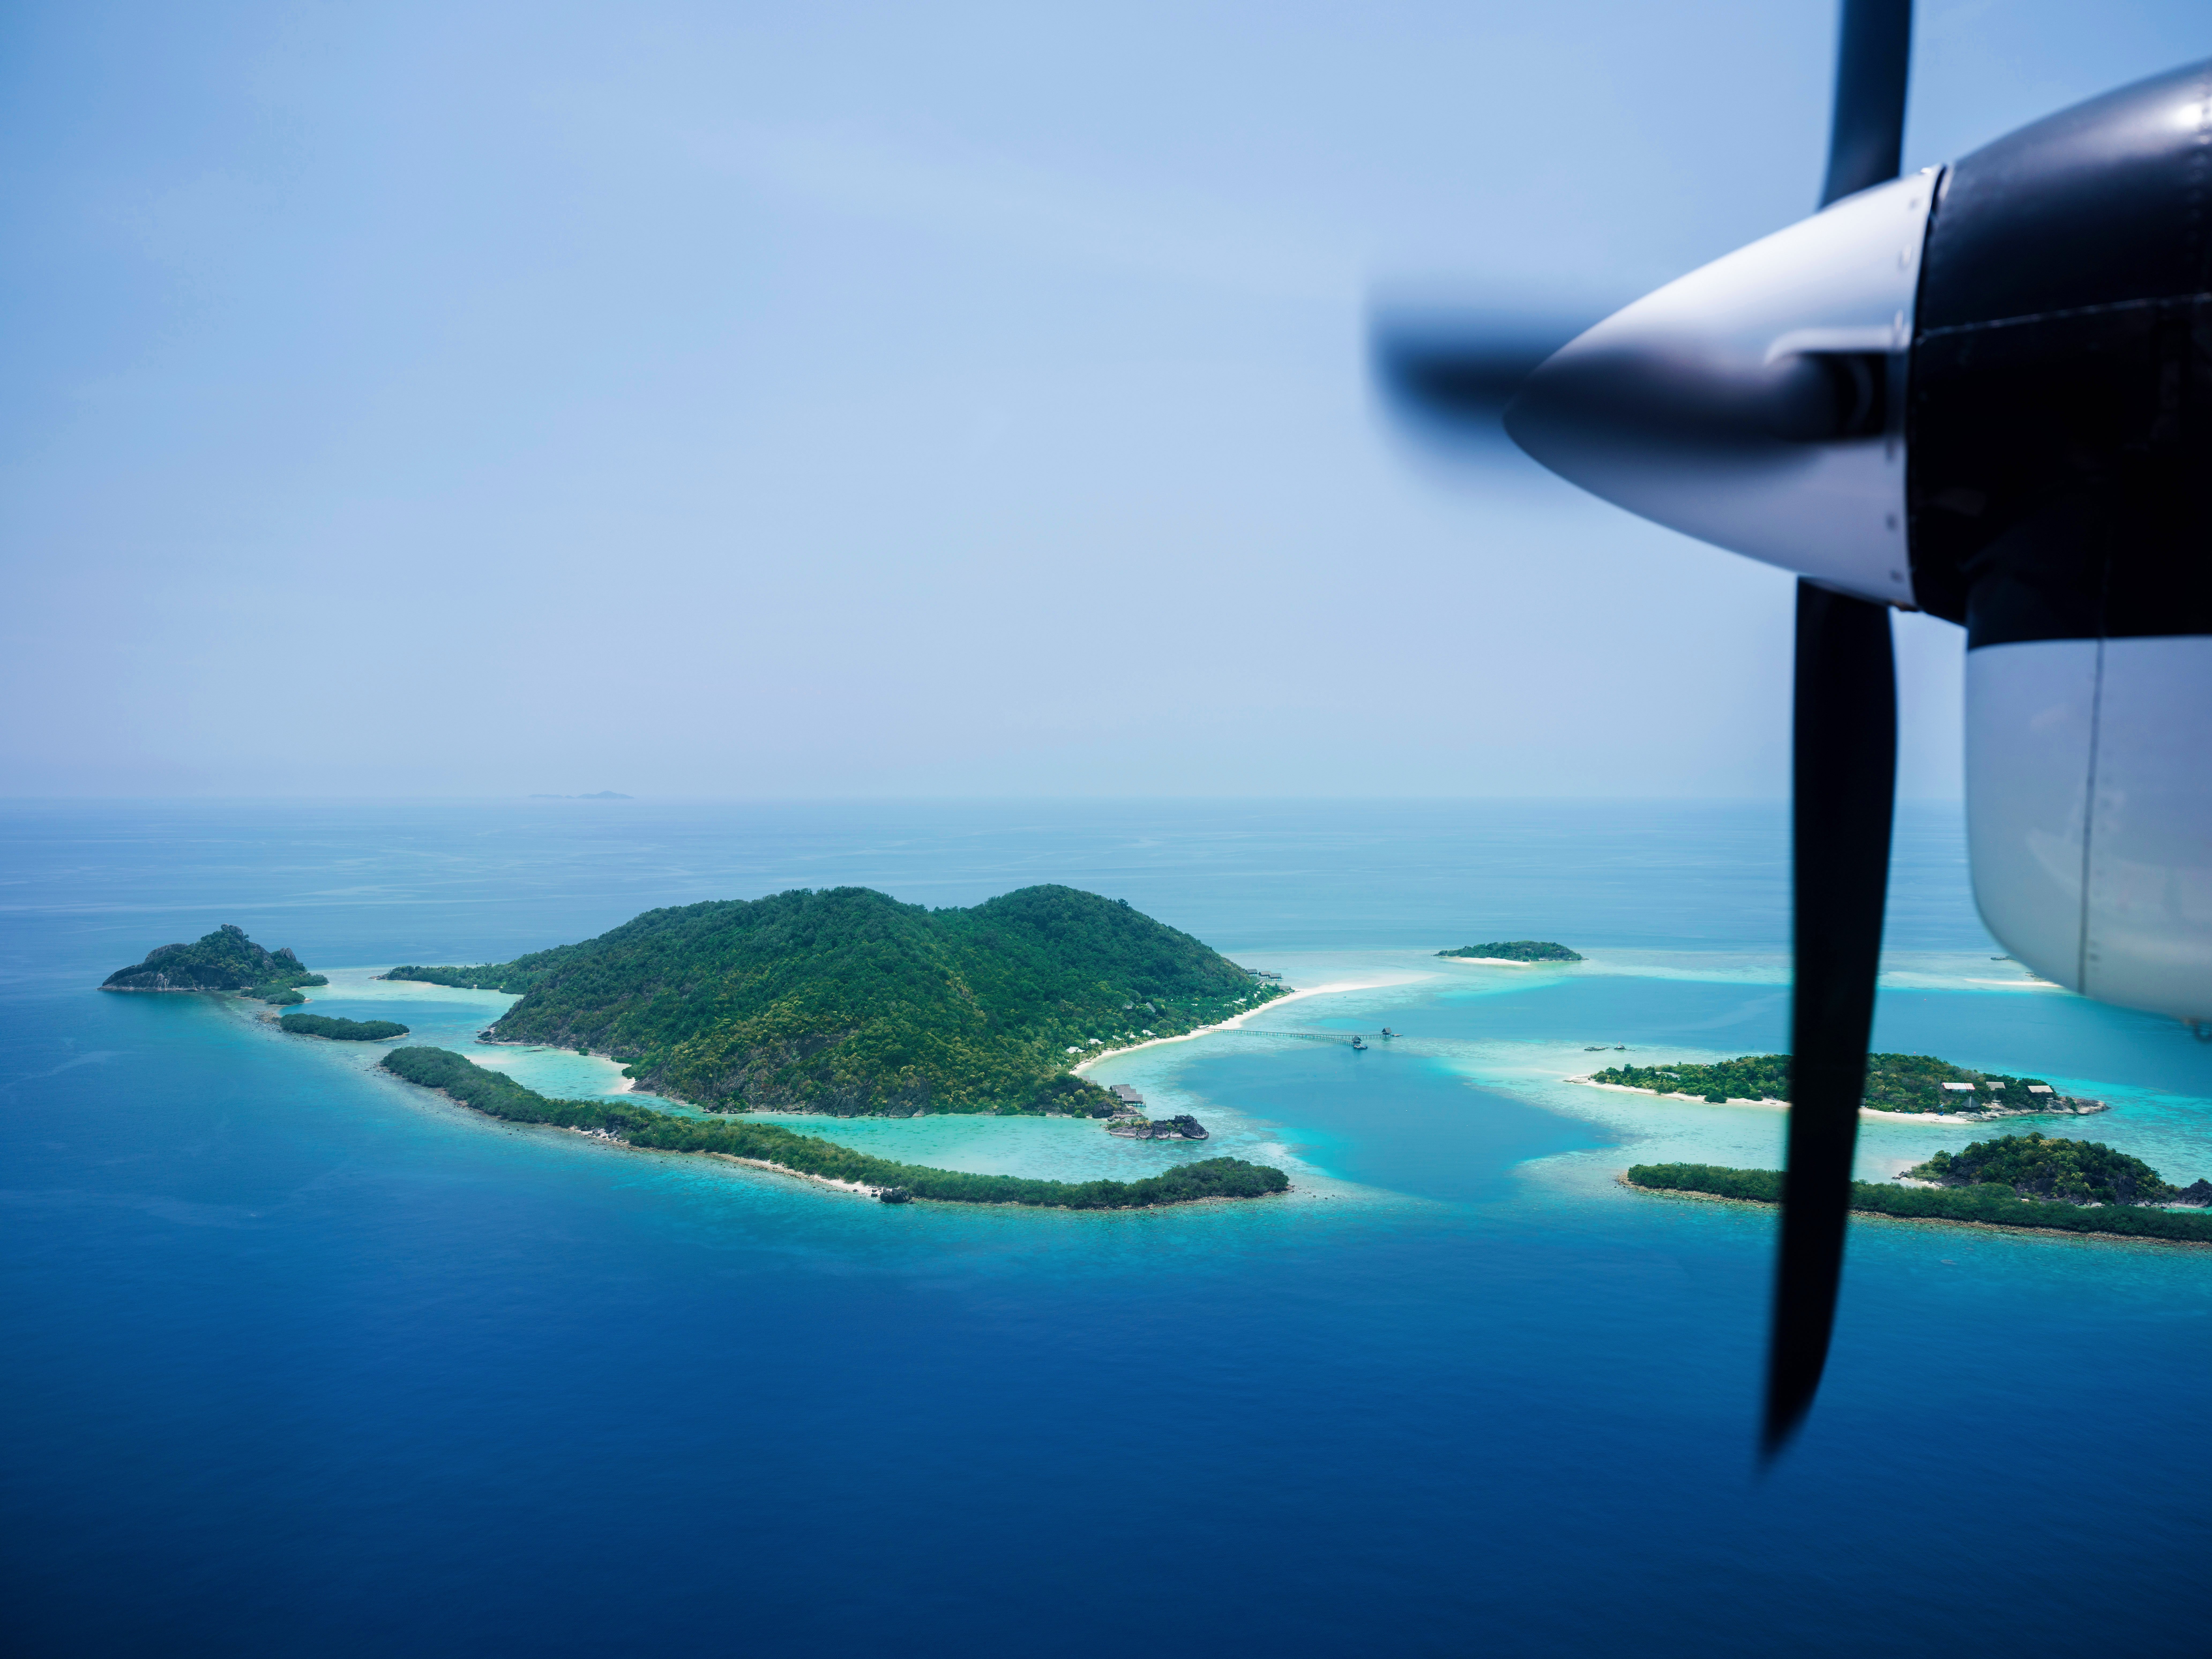 Seaplane over tropical islands, How to get to Bawah Reserve Indonesia